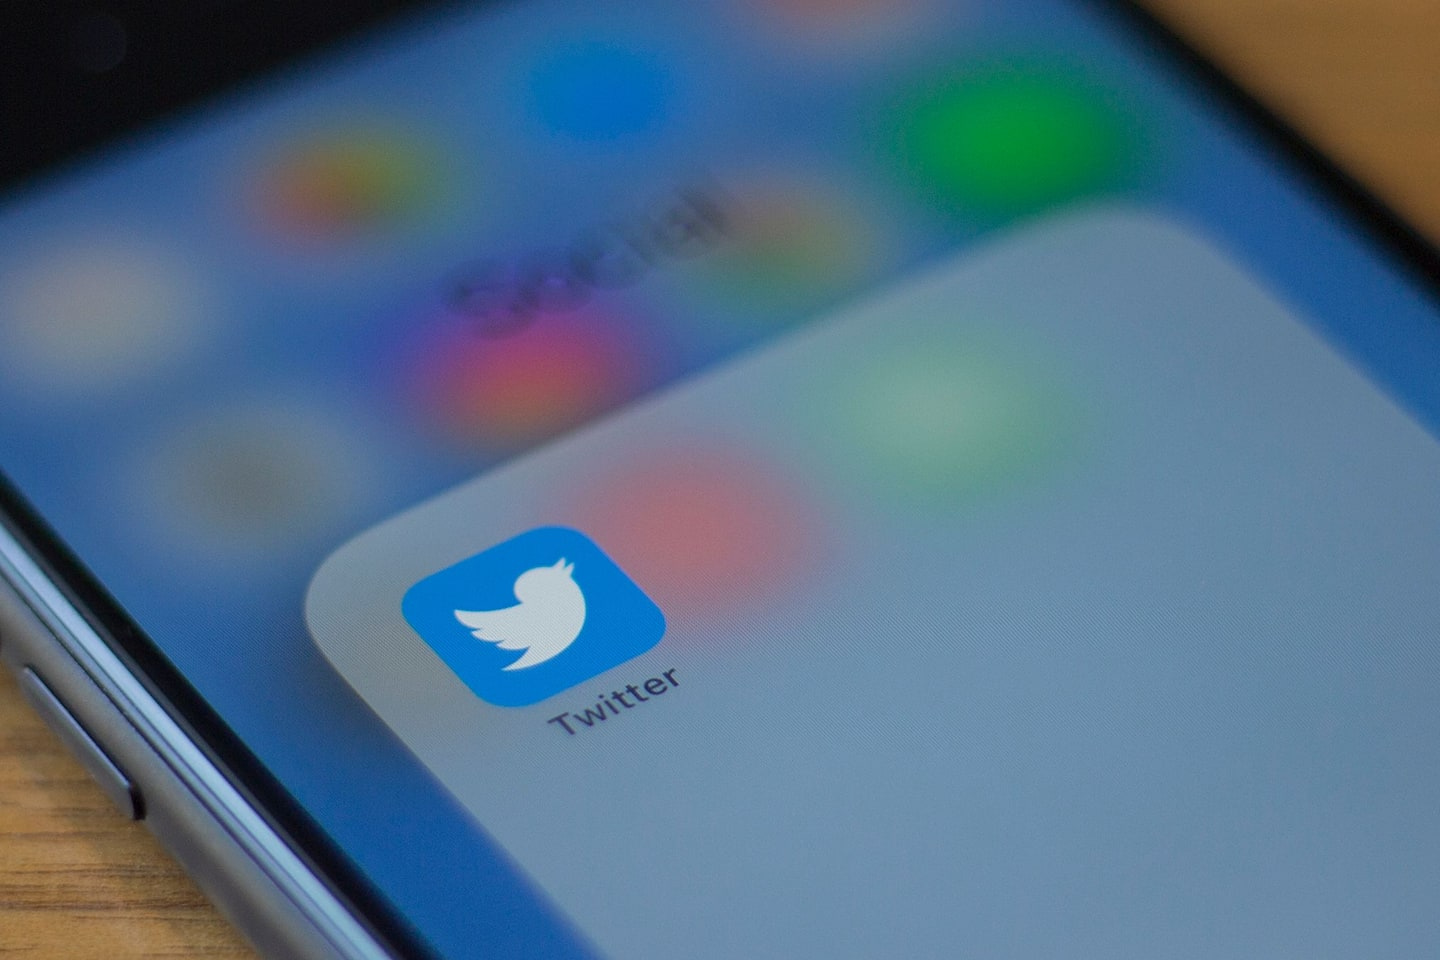 Thousands of reinstated Twitter accounts threaten to explode misinformation